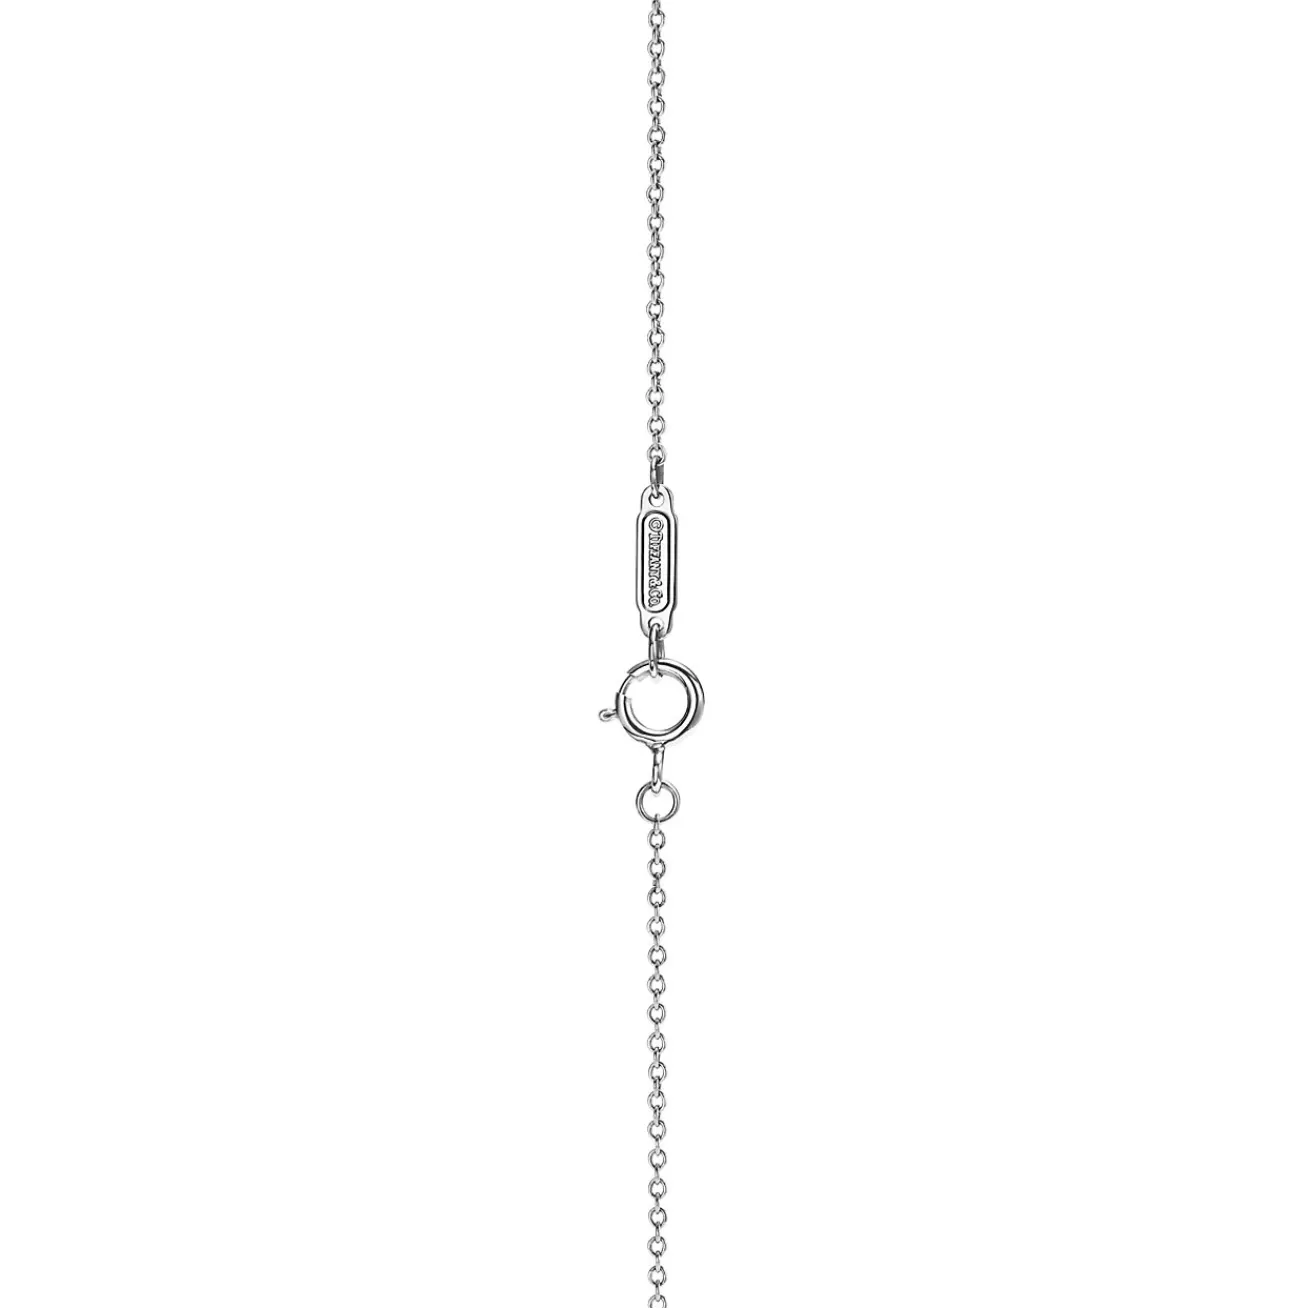 Tiffany & Co. Chain in 18k white gold, 18" long. | ^ Necklaces & Pendants | Necklaces & Pendants